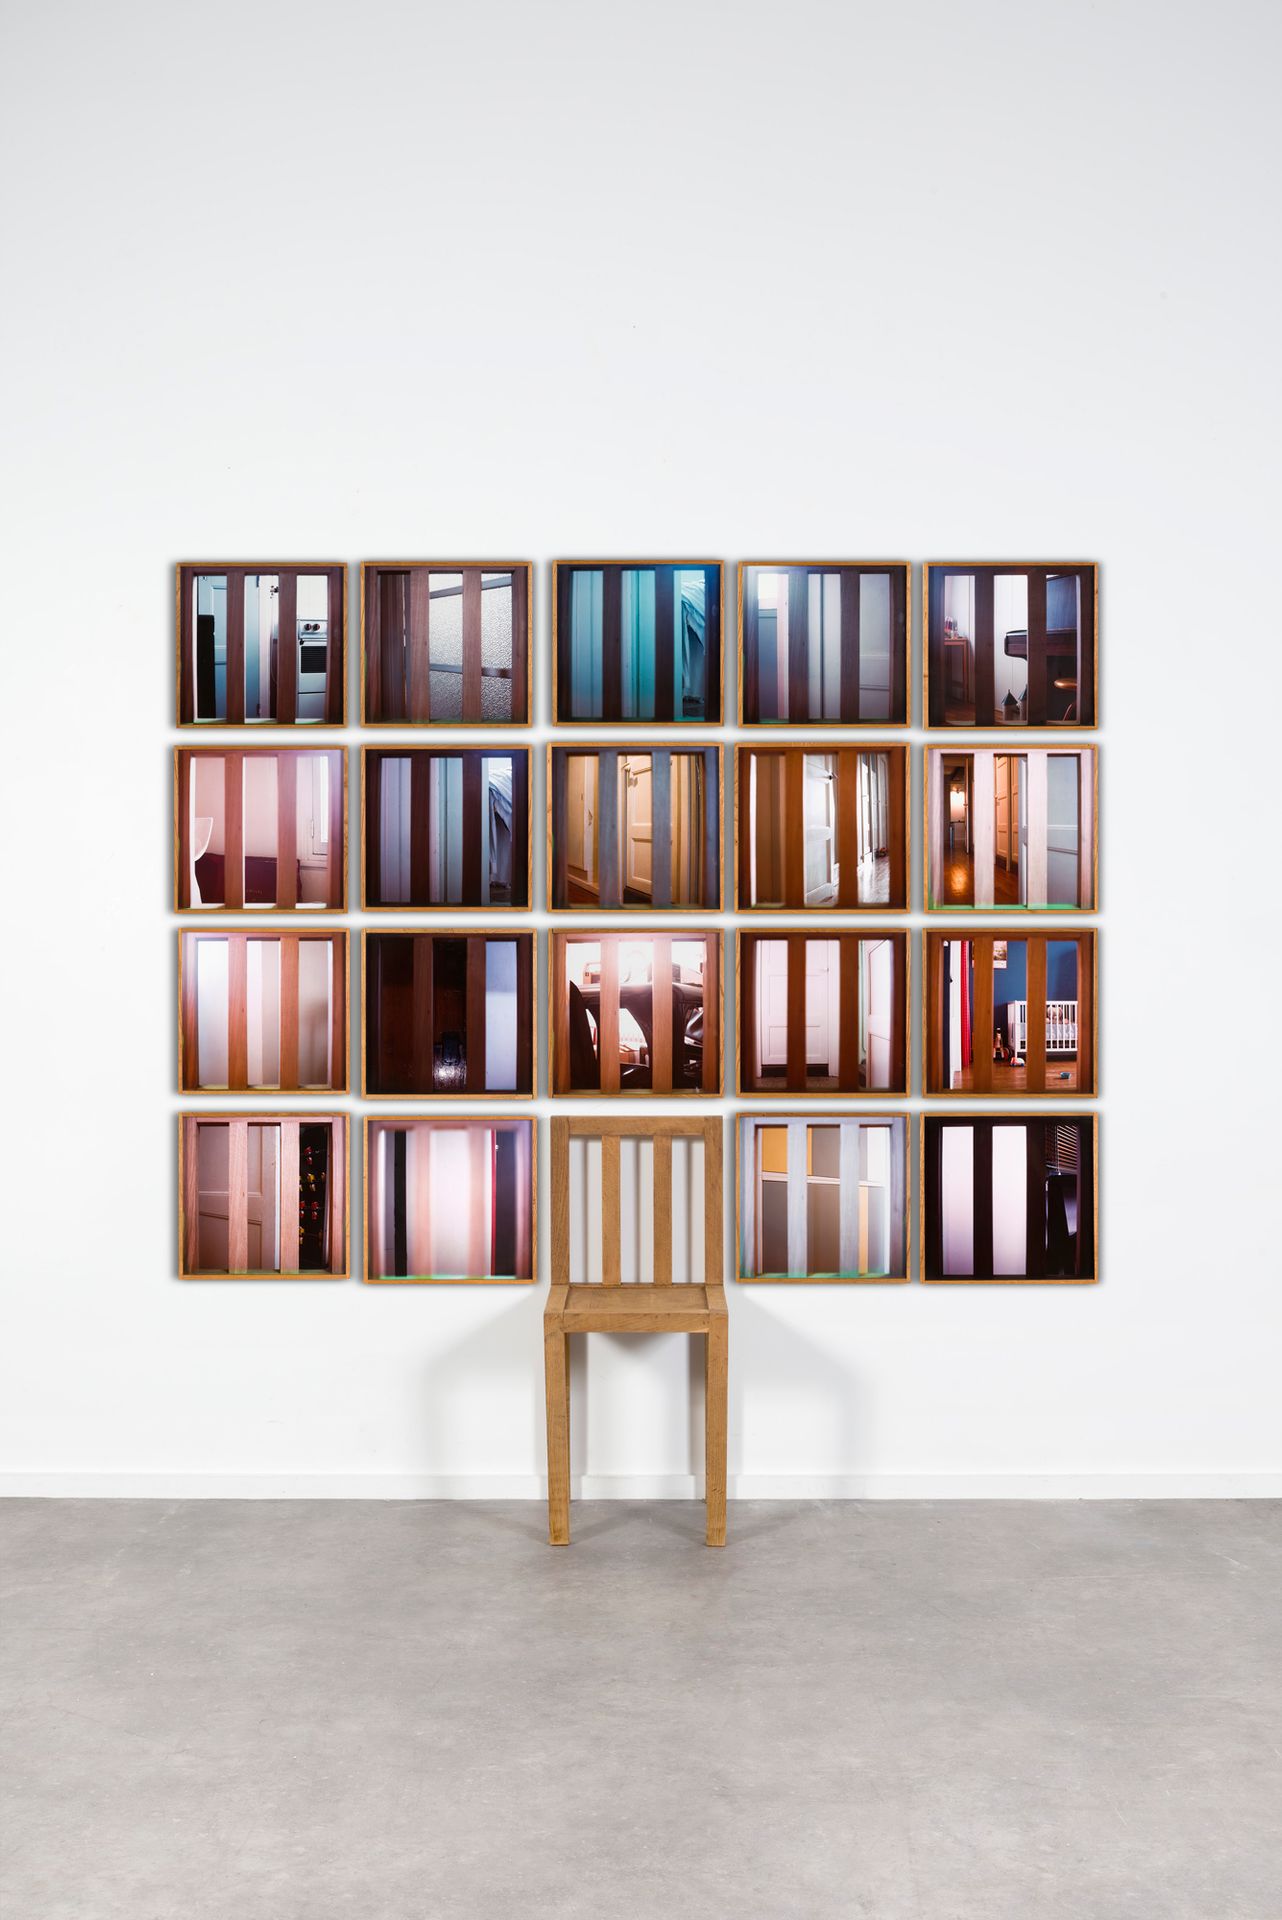 JEAN-LUC VILMOUTH (1952-2015) AR 
View of a 1986 chair

Installation
Wooden chai&hellip;